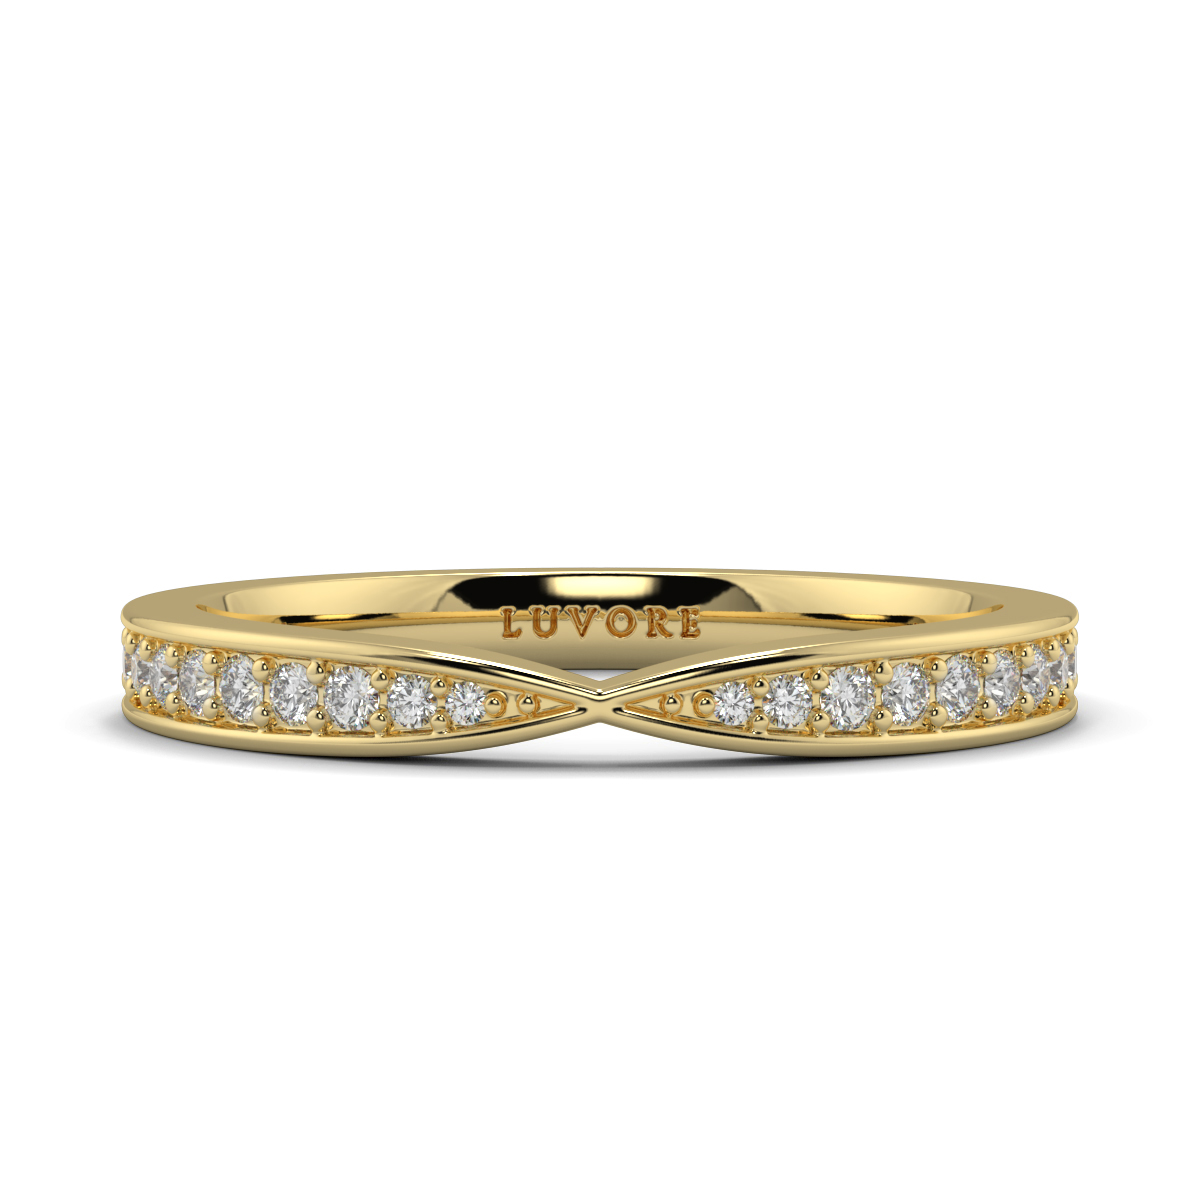 Wedding Band Ladies Diamond Shape To Fit Cross Over Ring Set